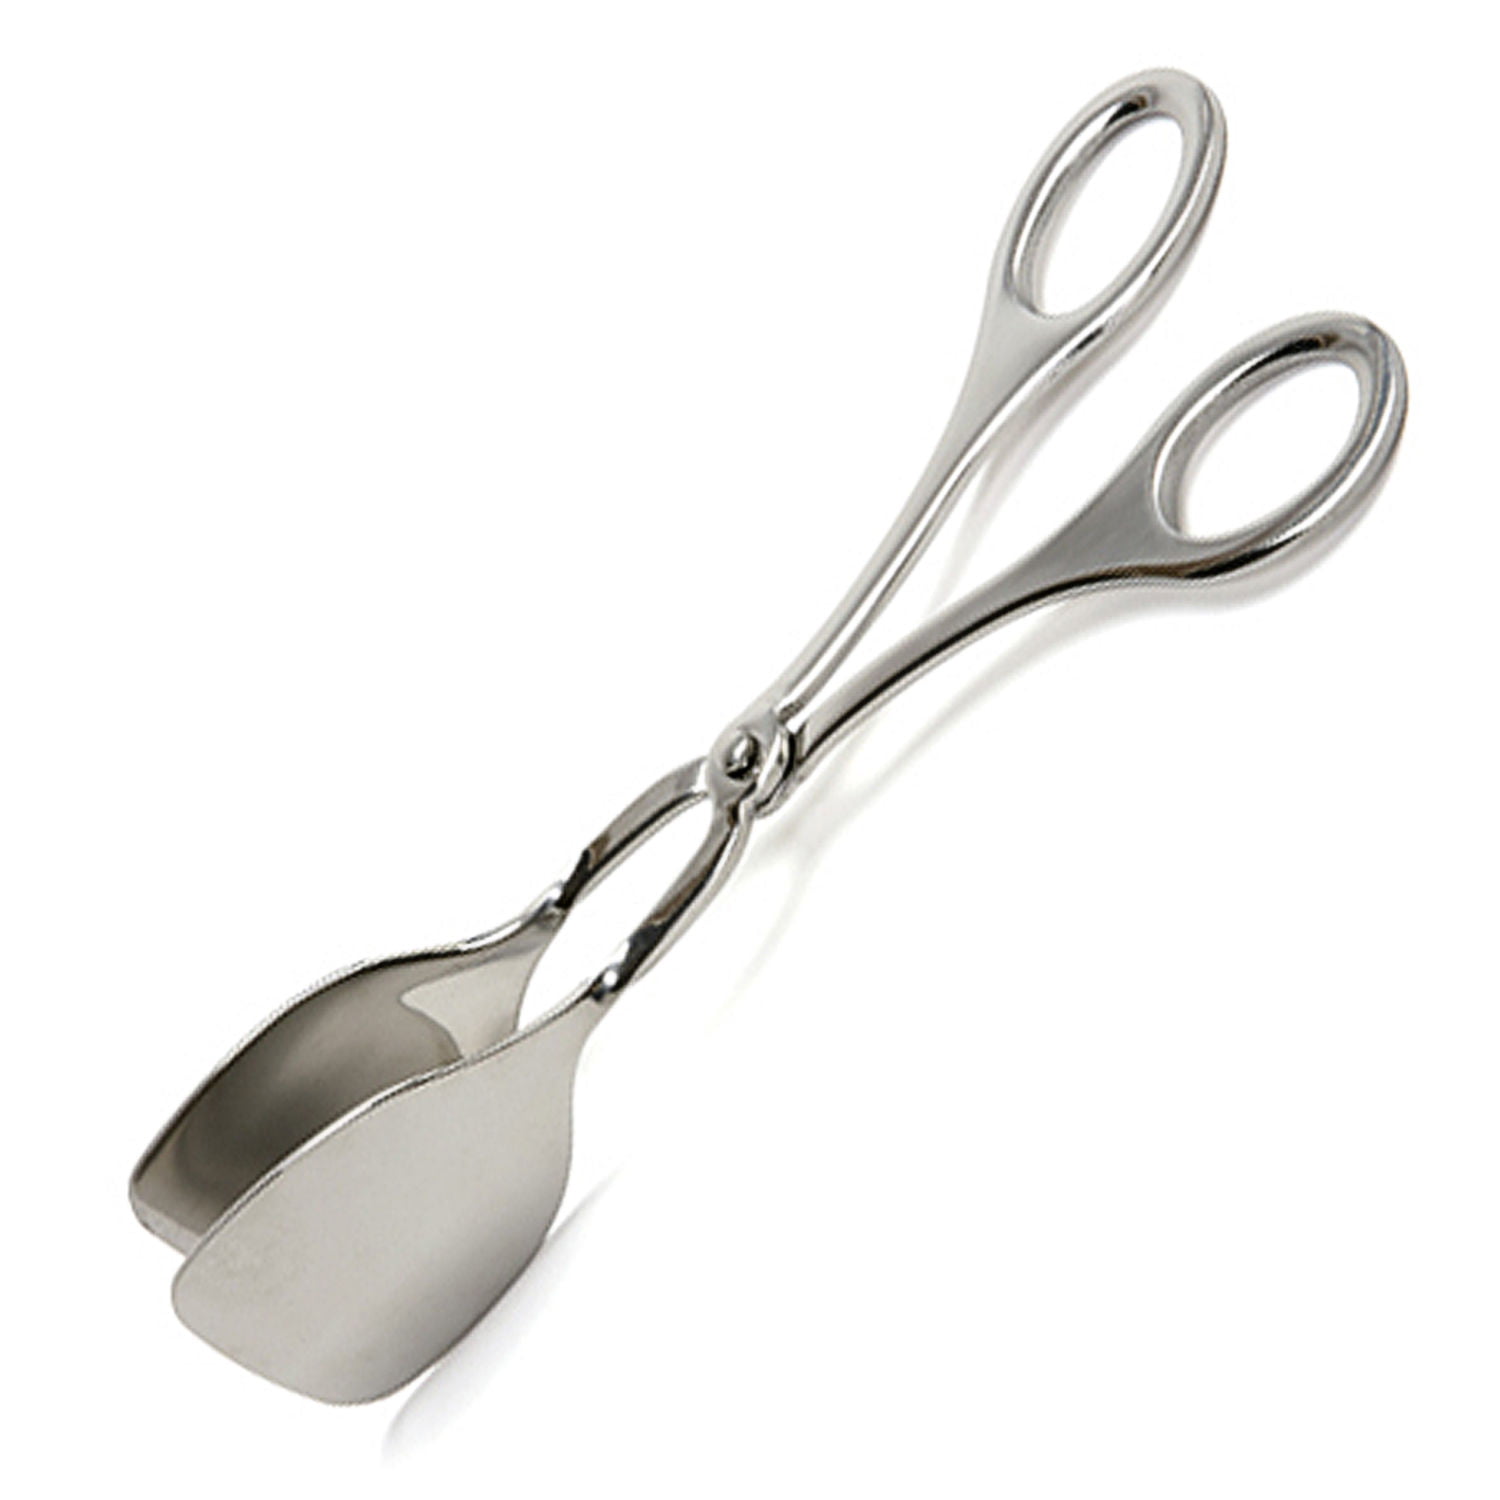 7 Inches Pack of 2 Norpro Polished Stainless Steel Serving Tongs 